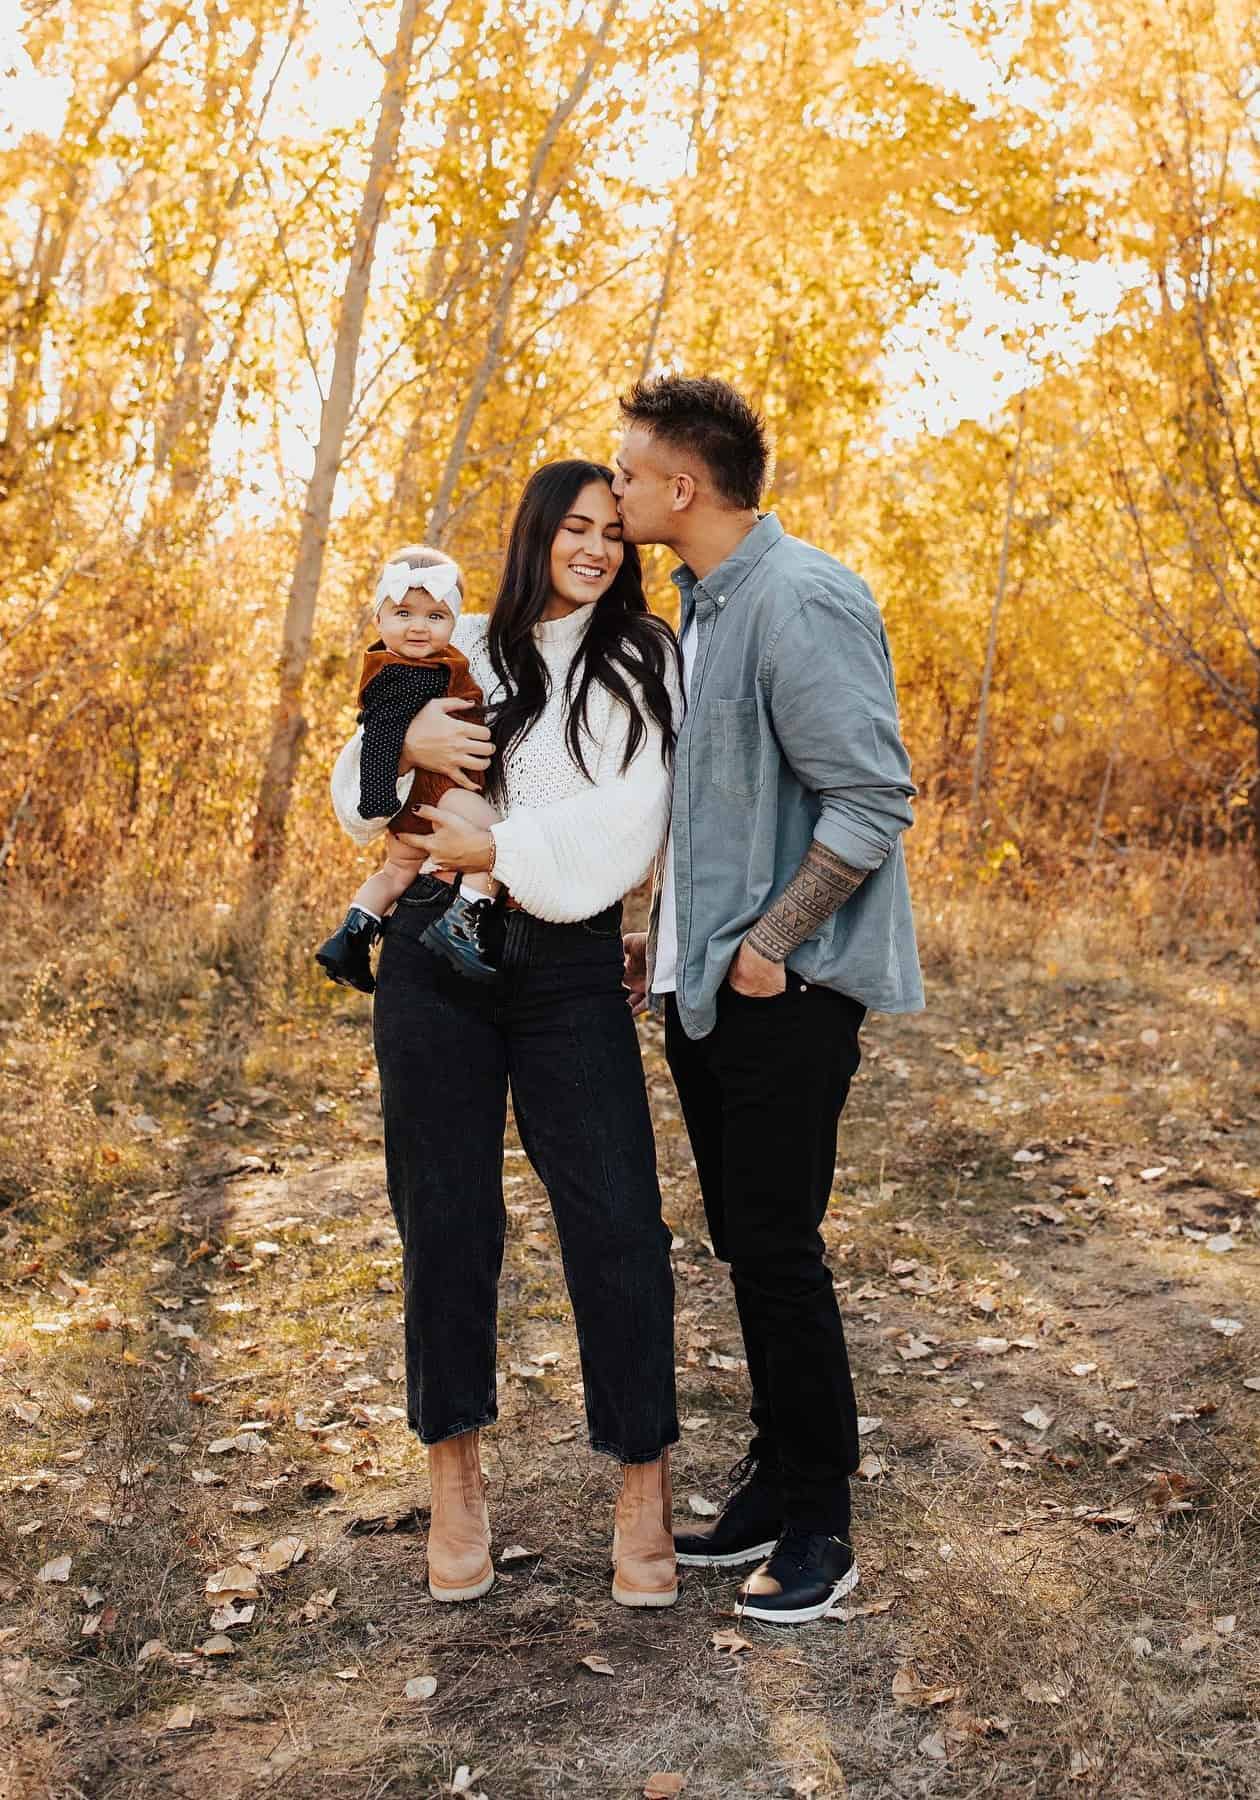 A family photo in fall with a mom, dad, and baby girl dress in neutral colors